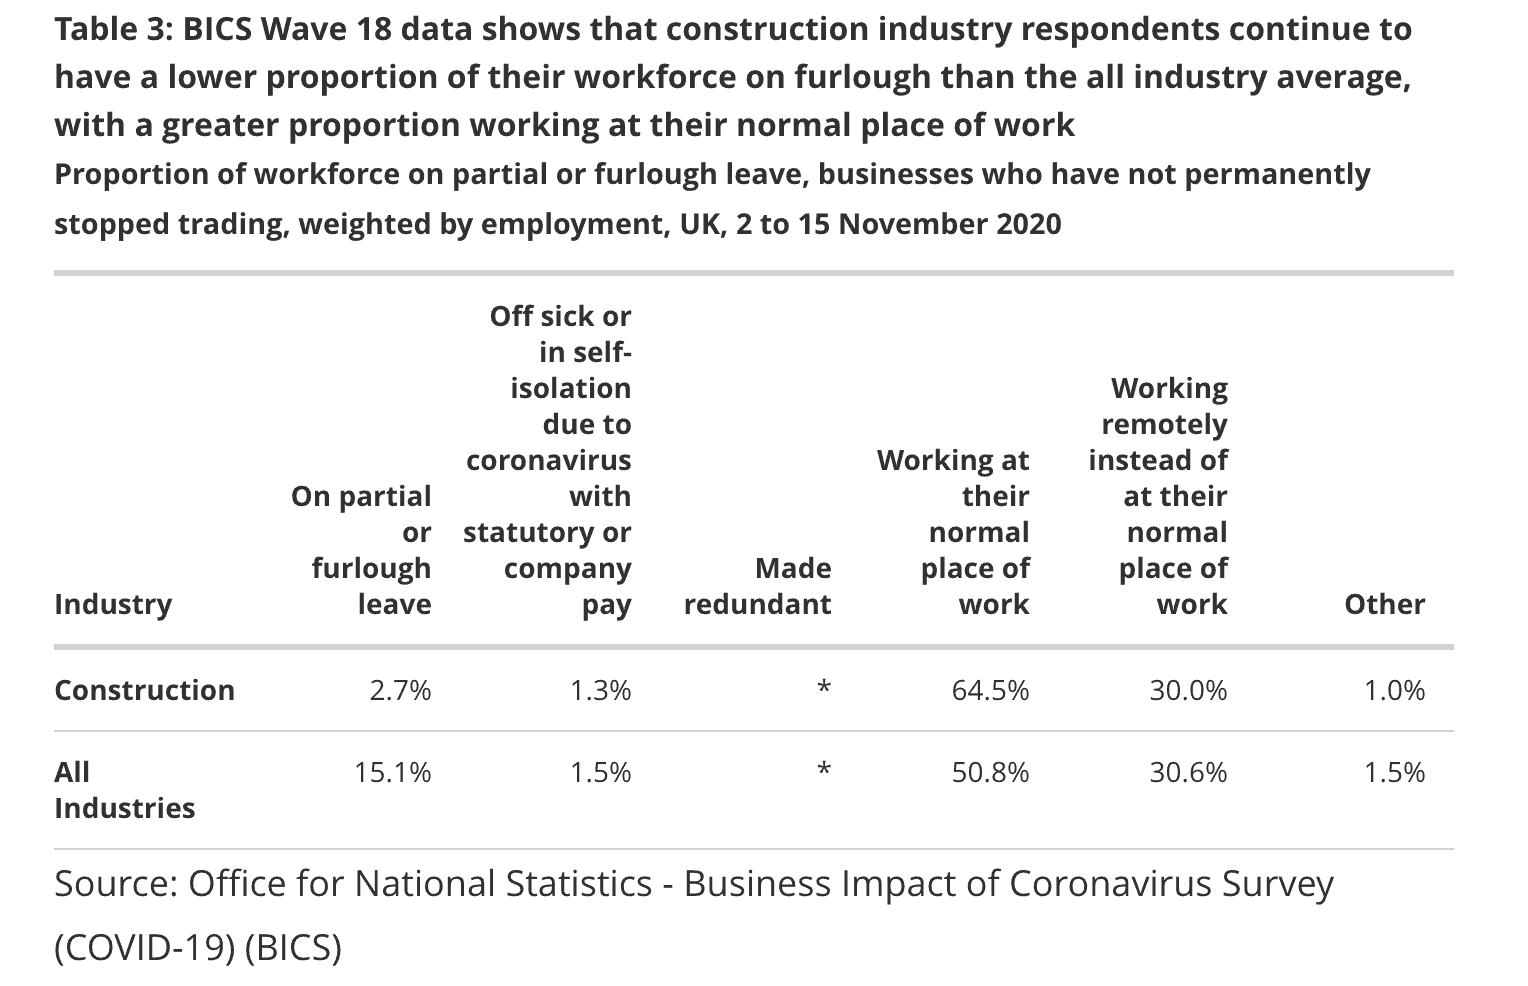 Table 3: Proportion of workforce on partial or furlough leave, businesses who have not permanently stopped trading, weighted by employment, UK, 2 to 15 Nov 2020